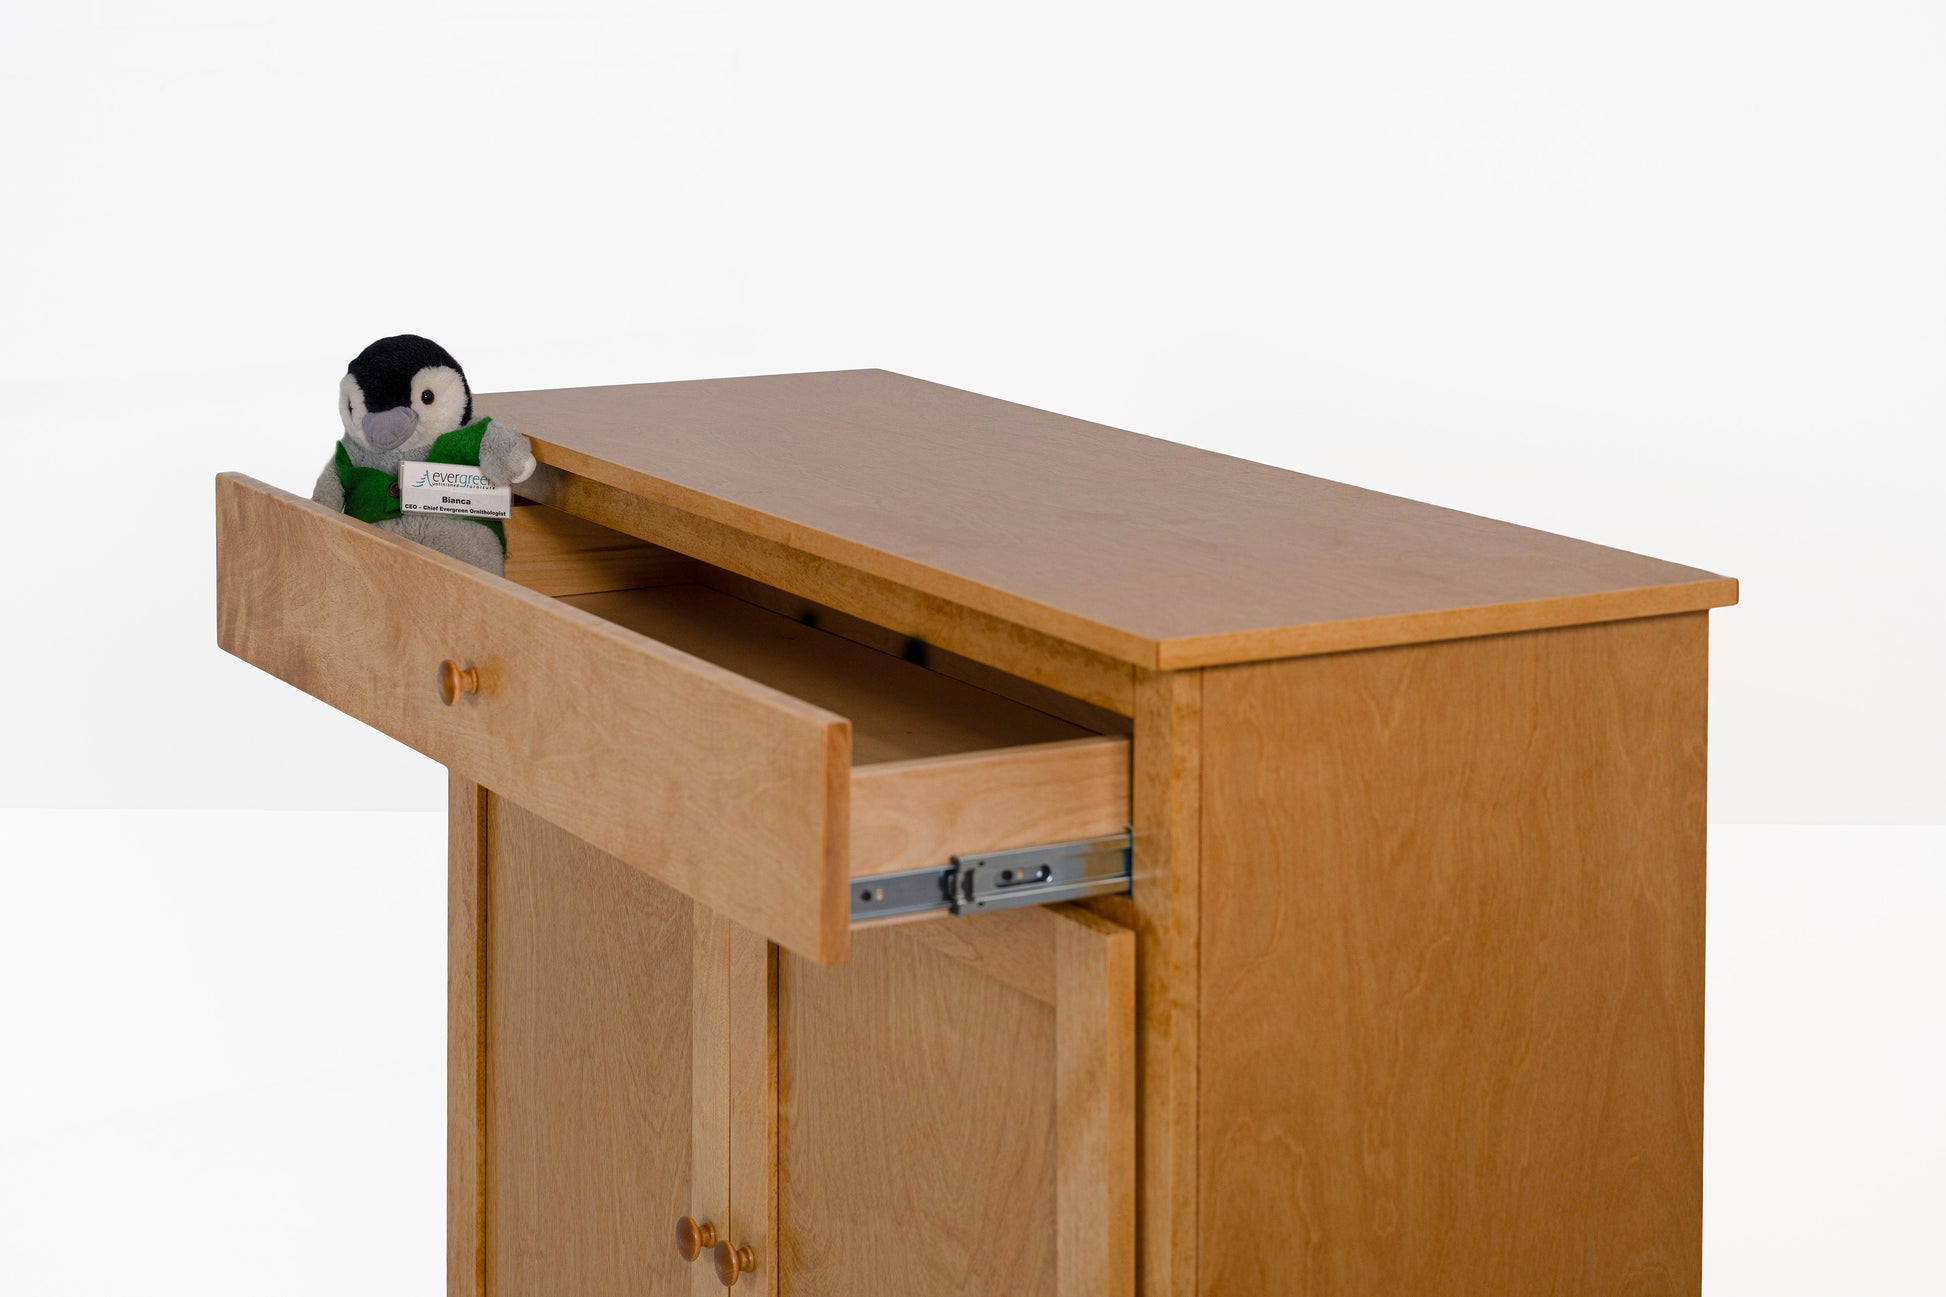 Berkshire Shaker Cabinet with drawer, shown with drawer open to highlight full extension glides.